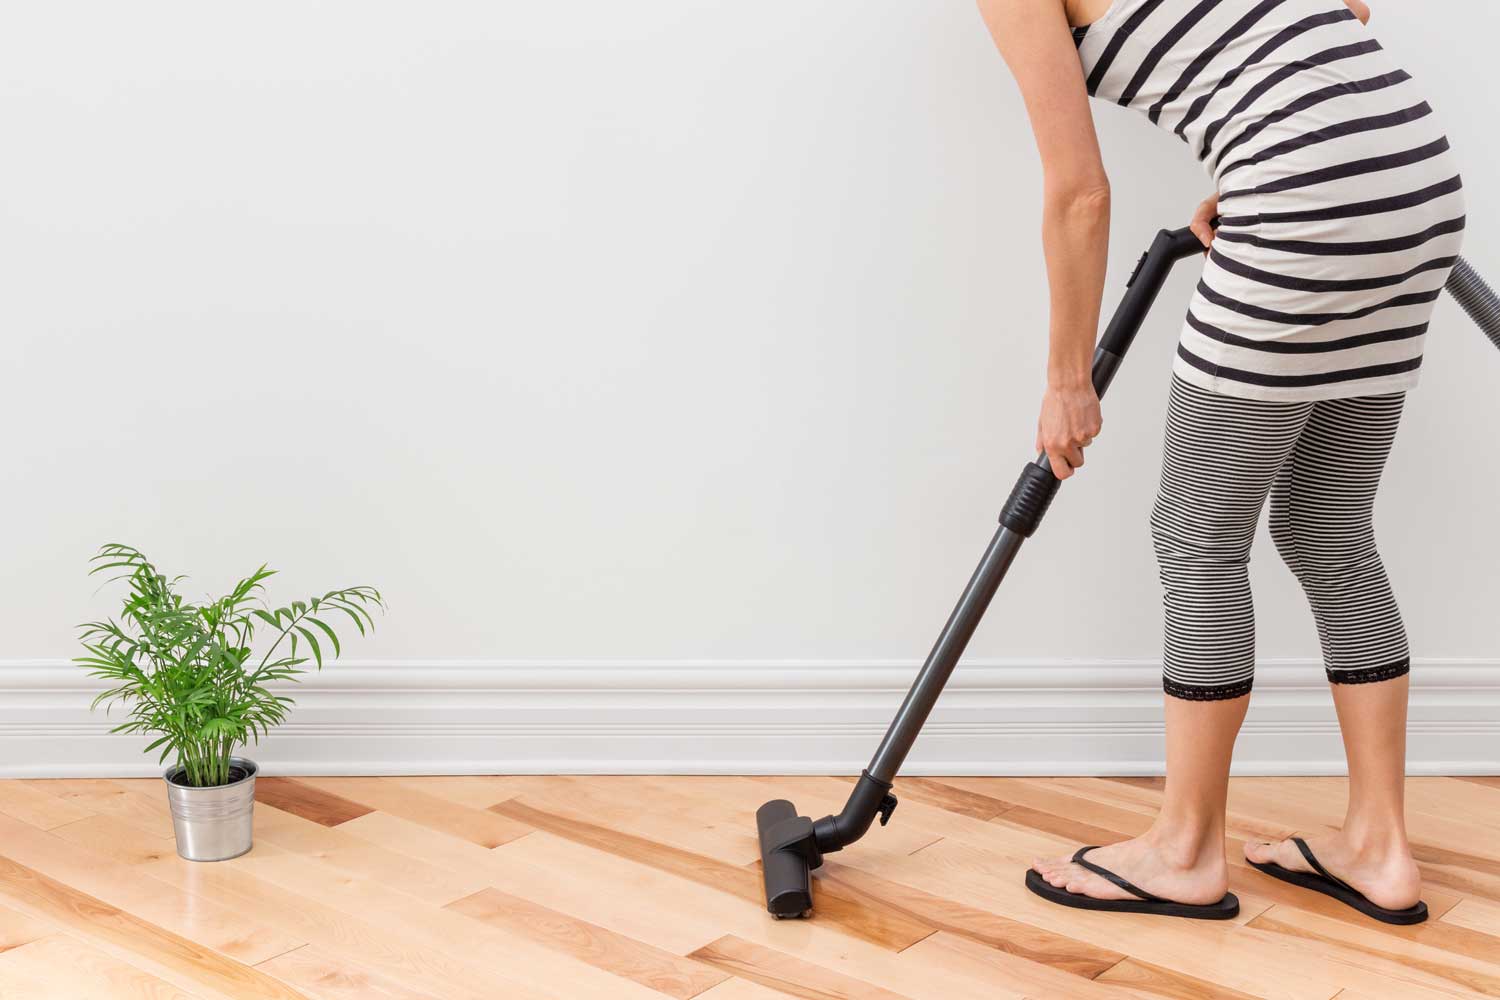 Regulary vacuum or sweep floors to remove dirt and keep your home floors looking amazing - tips from Footprints Floors in Utah County.